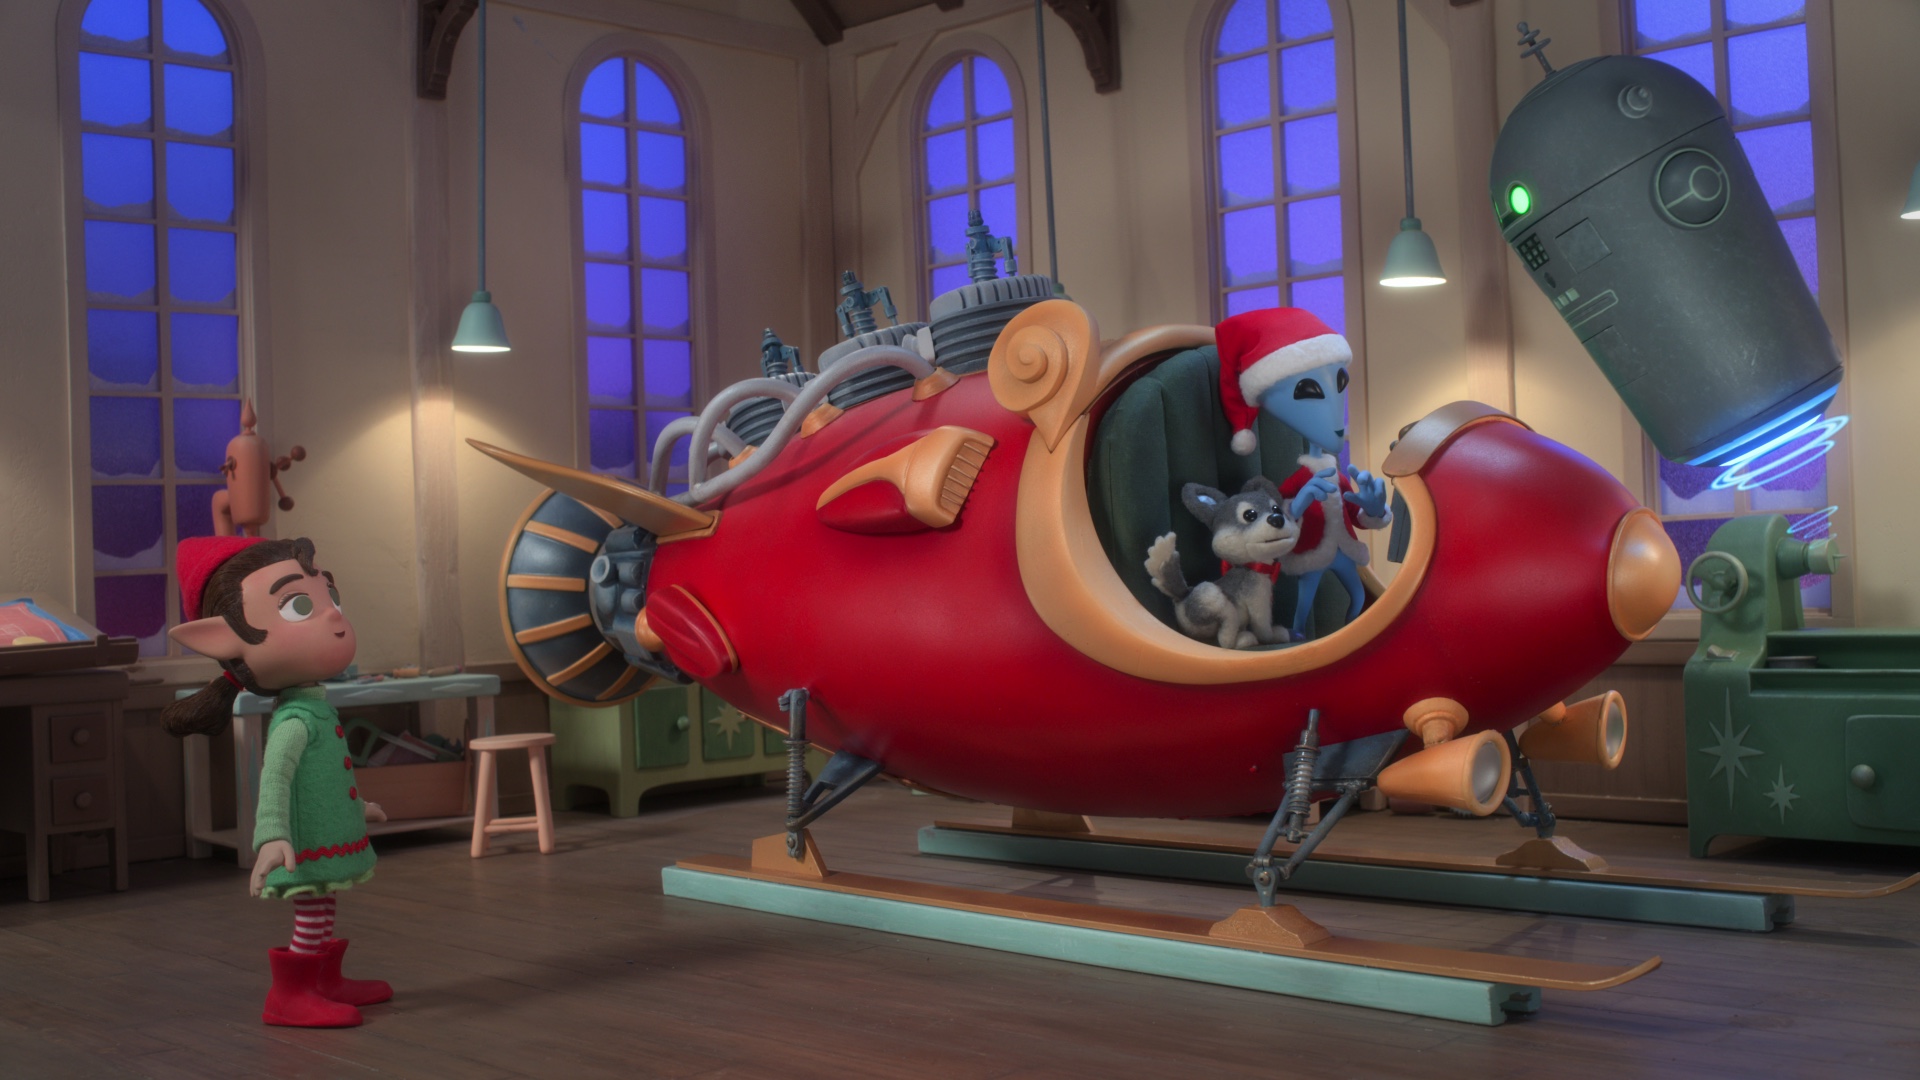 Holly, the puppy, X, and SAMTU test out the sleigh. (Image: Netflix)